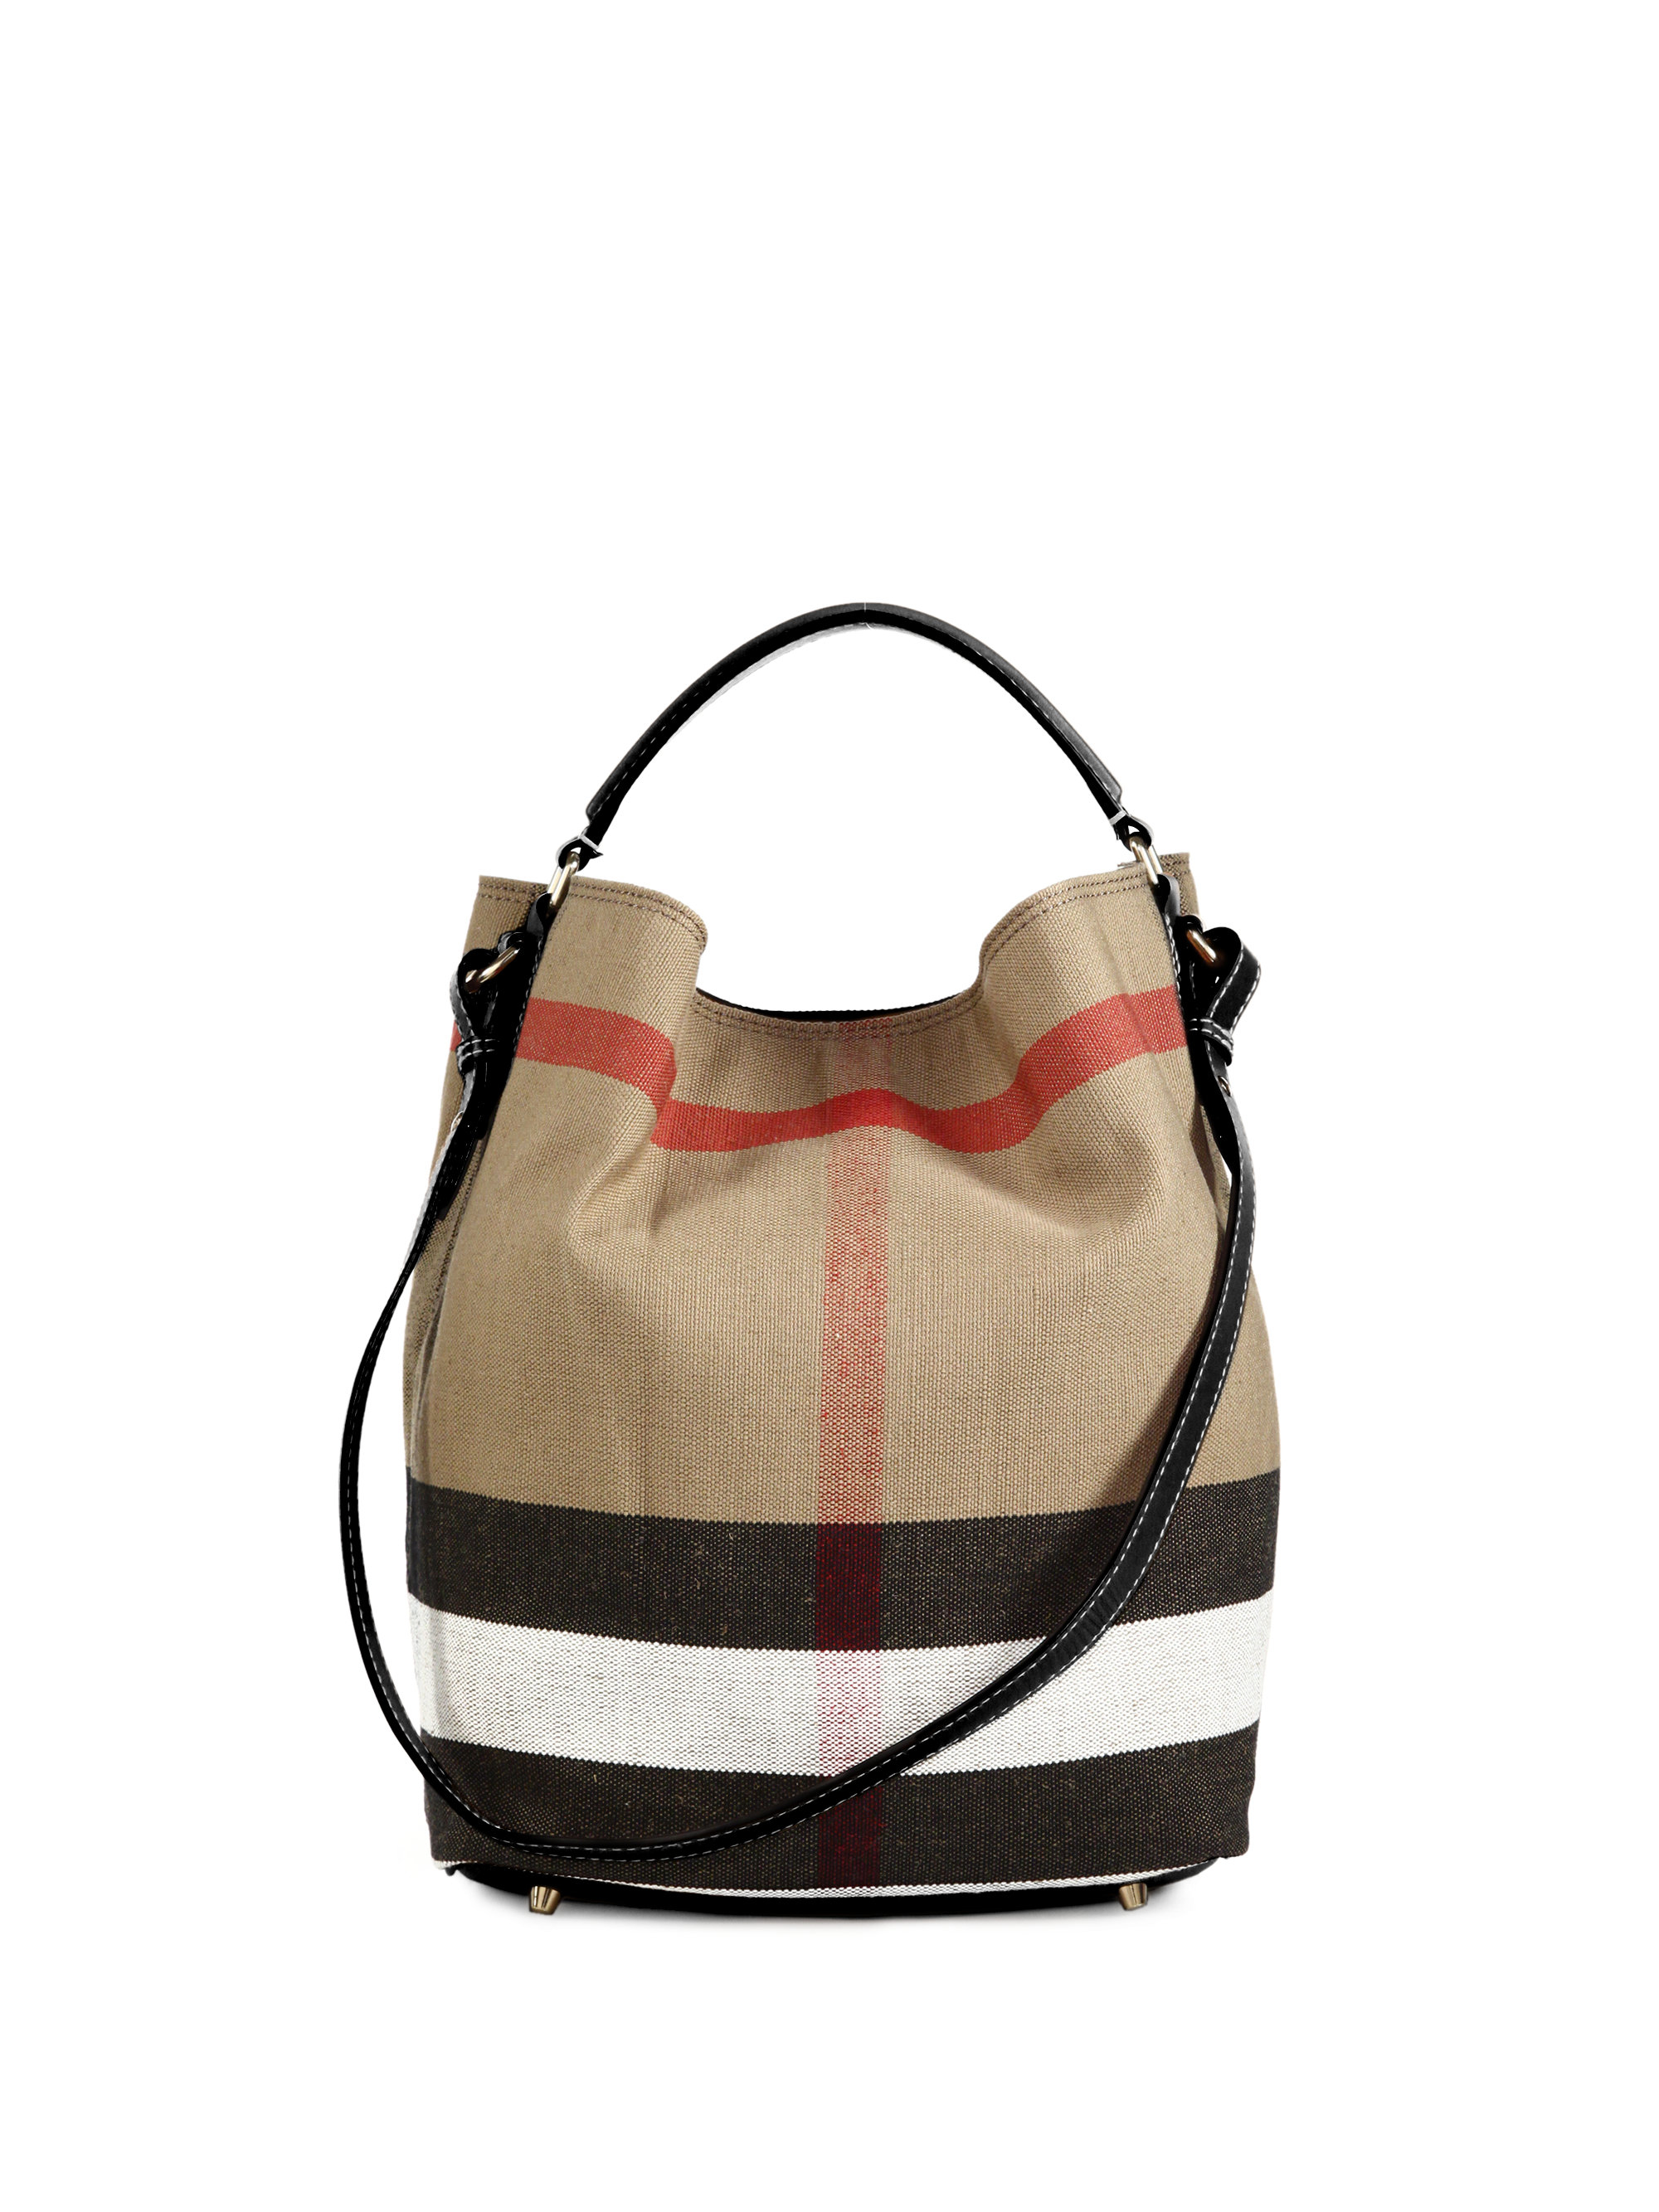 Burberry Medium House Check Cotton & Leather Bucket Bag in Natural | Lyst